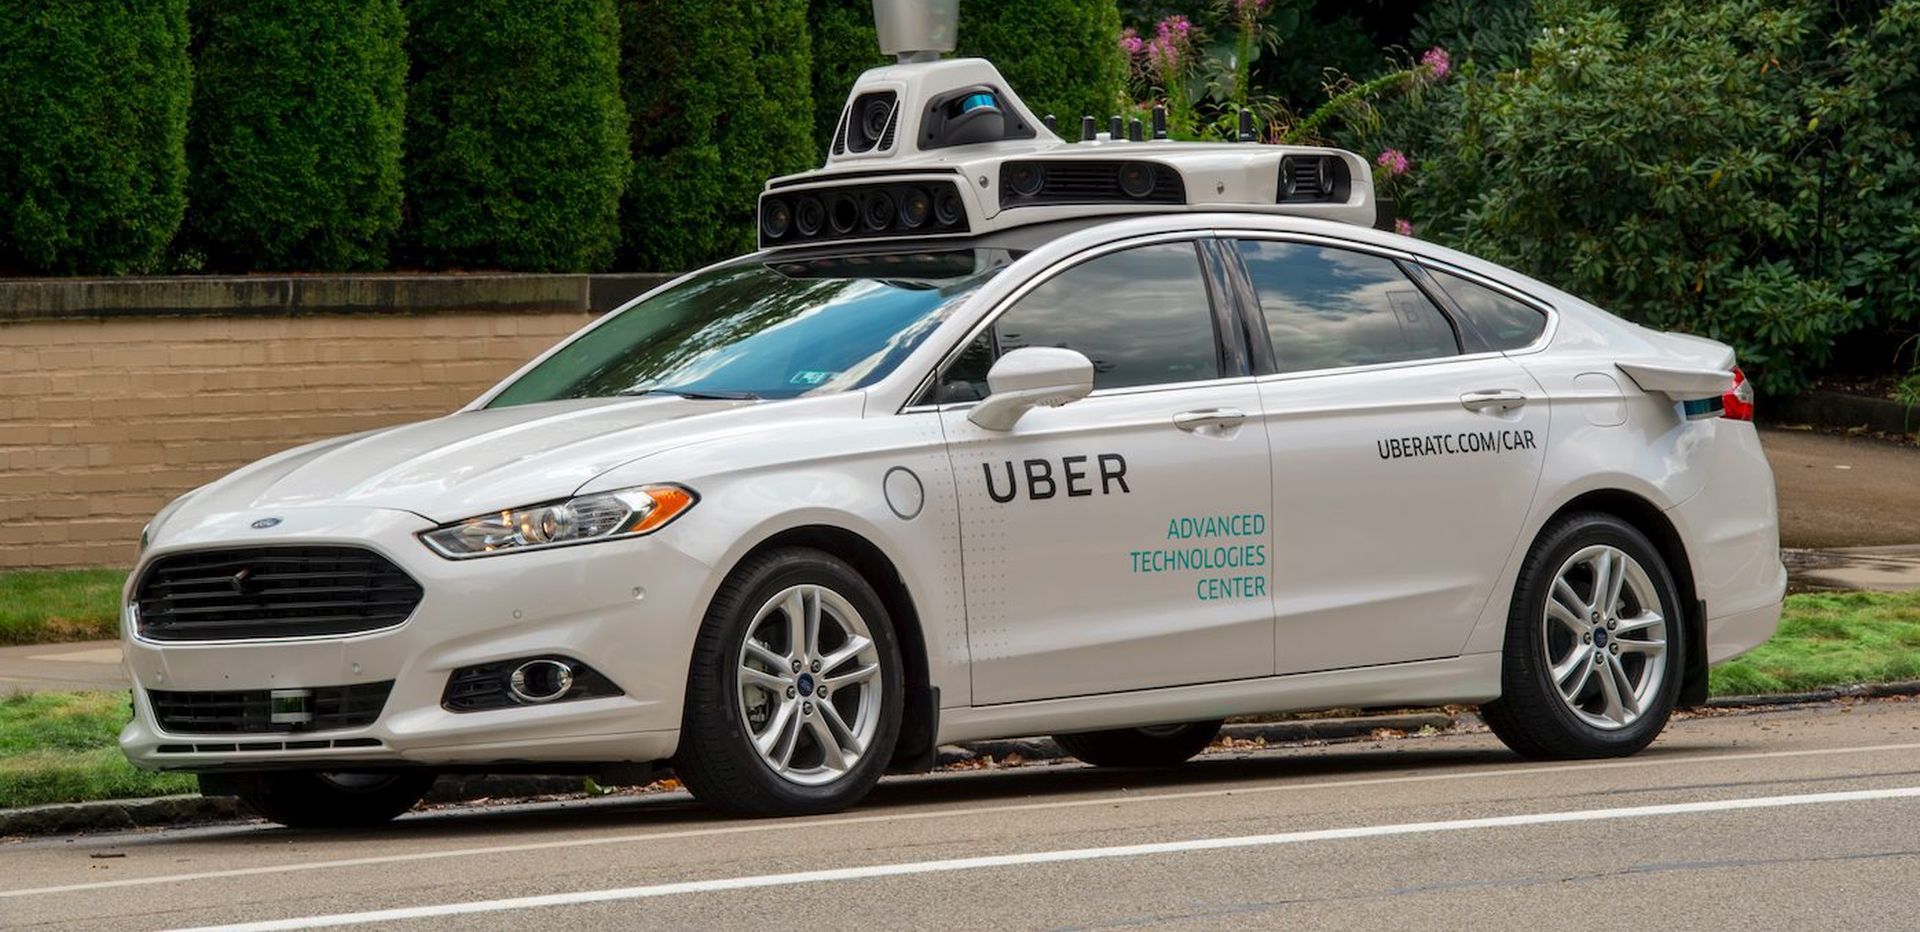 epa05540025 An undated handout photo provided by Uber on 14 September 2016 shows an Uber self-driving car, in Pittsburgh, Pennsylvania, USA. The online ride-sharing and transportation company announced on 14 September 2016 that the world's first Self-Driving Uber is in circulation on the roads in Pittsburgh as part of an initial trial. The Slef-Driving Ubers will have a safety driver in the front seat because the cars still require human intervention in certain conditions, including bad weather.  EPA/UBER / HANDOUT MANDATORY CREDIT: UBER HANDOUT EDITORIAL USE ONLY/NO SALES